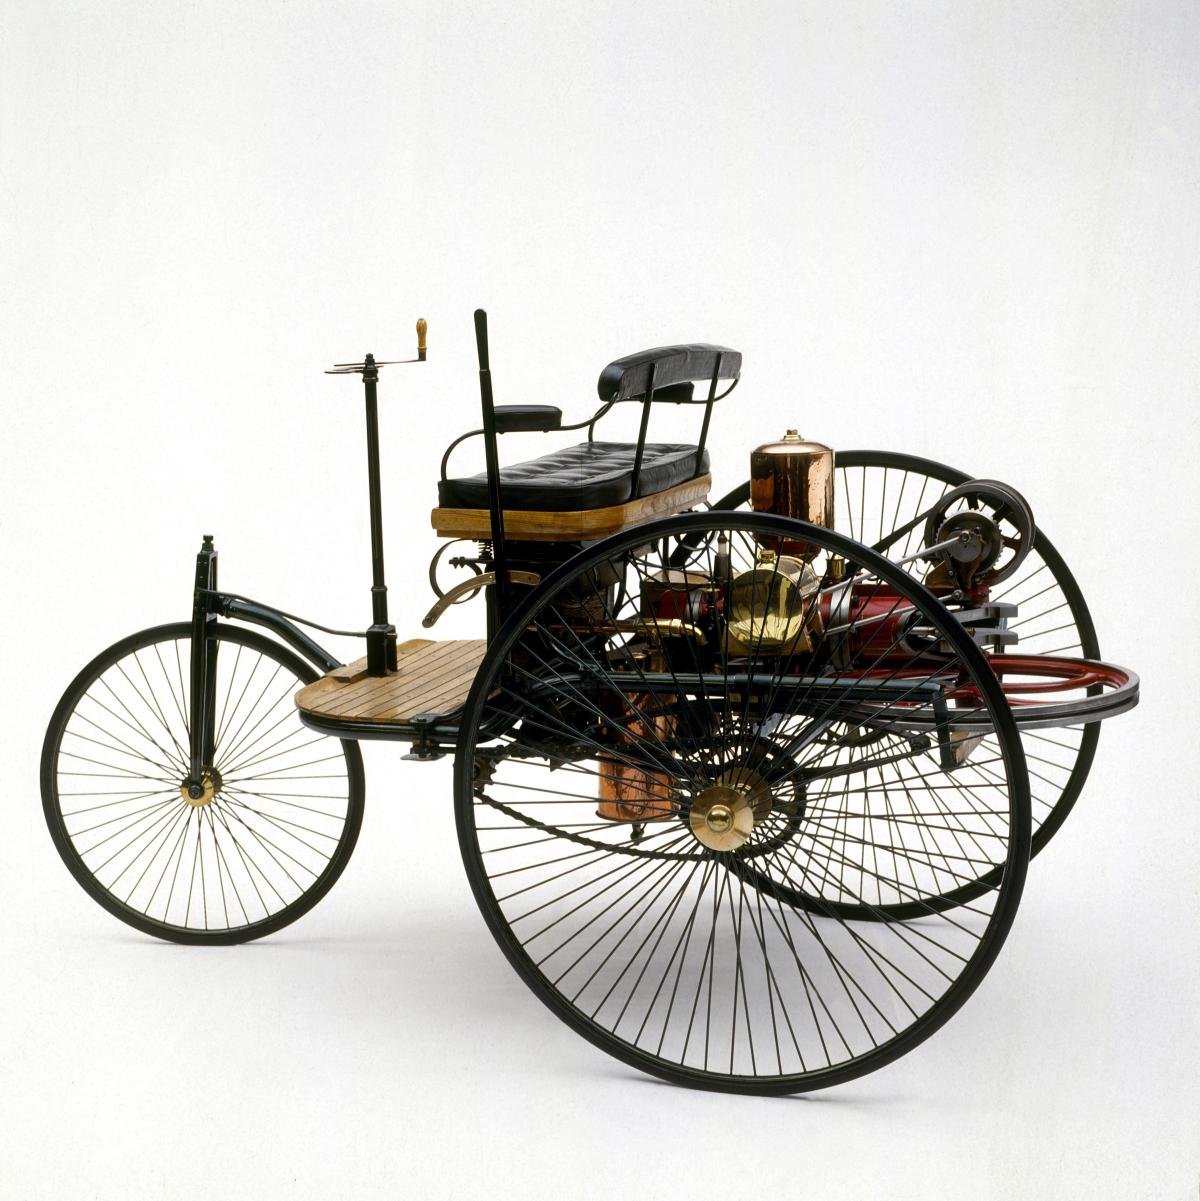 The Motorwagen had three wheels, a bench seat, and a crank used for steering, and the two-stroke piston engine went on to set the precedent for future early automobiles.